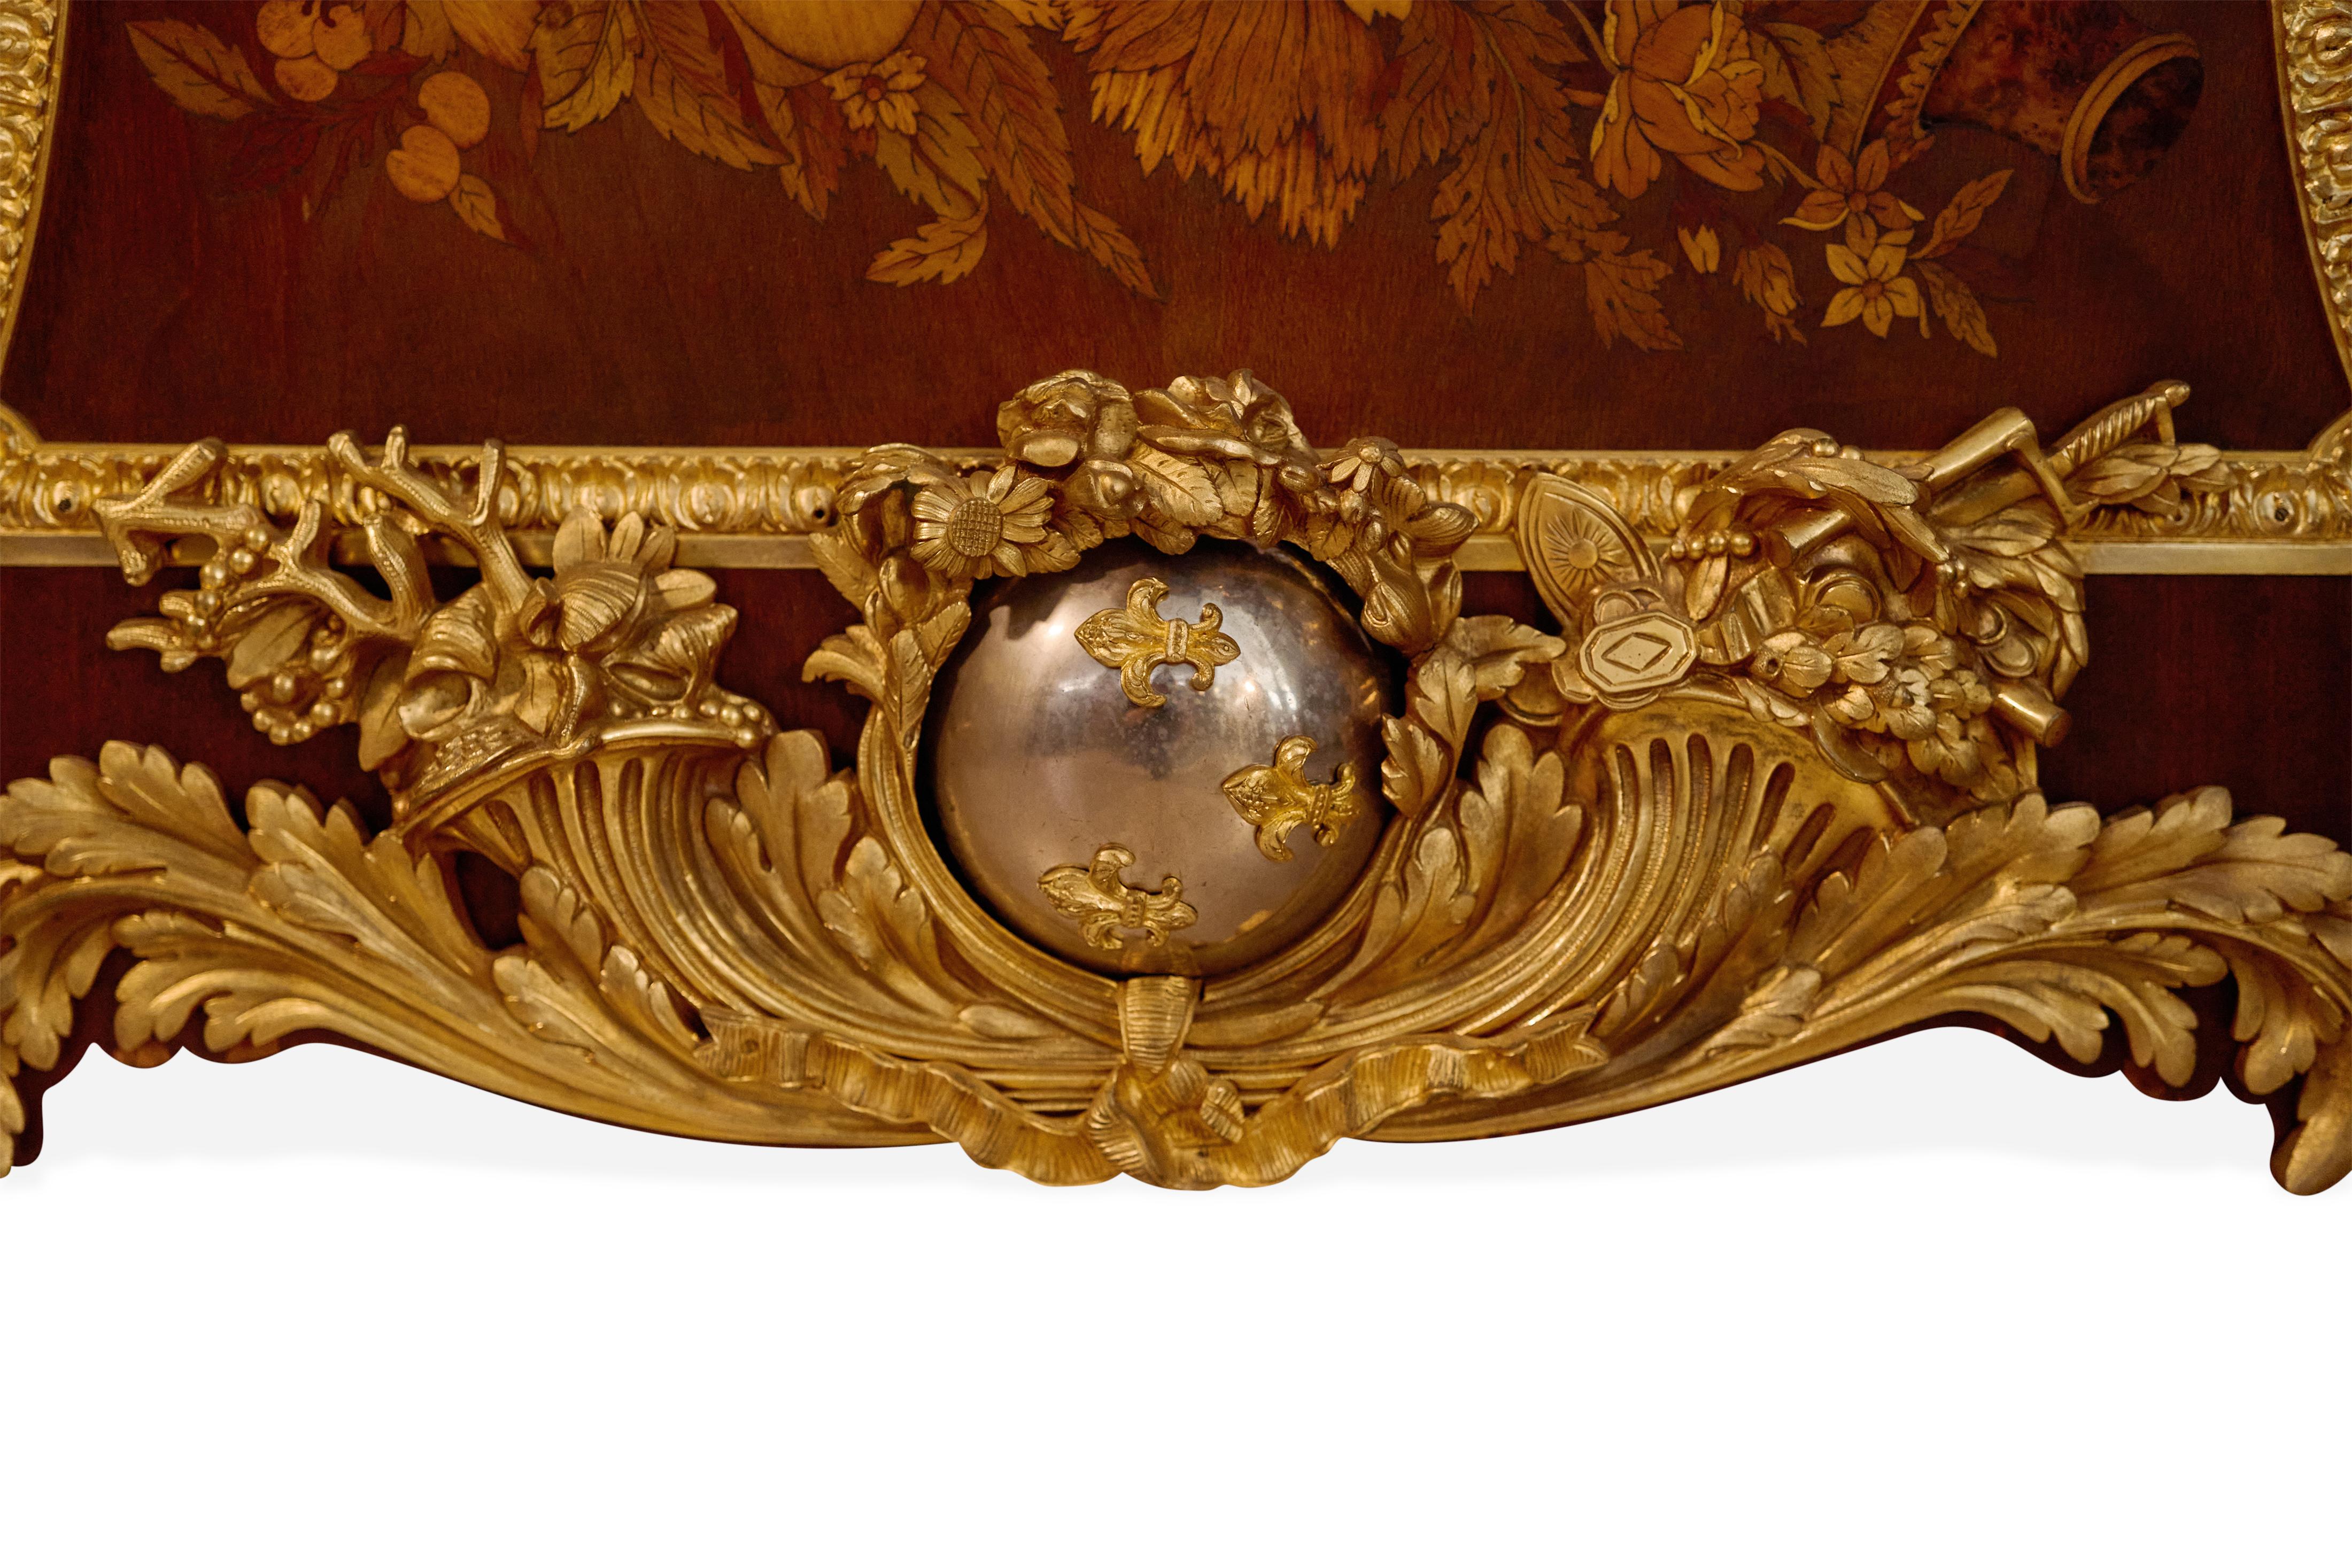 19th Century French Gilt-Bronze Mounted Commode after Jean-Henri Riesener For Sale 3